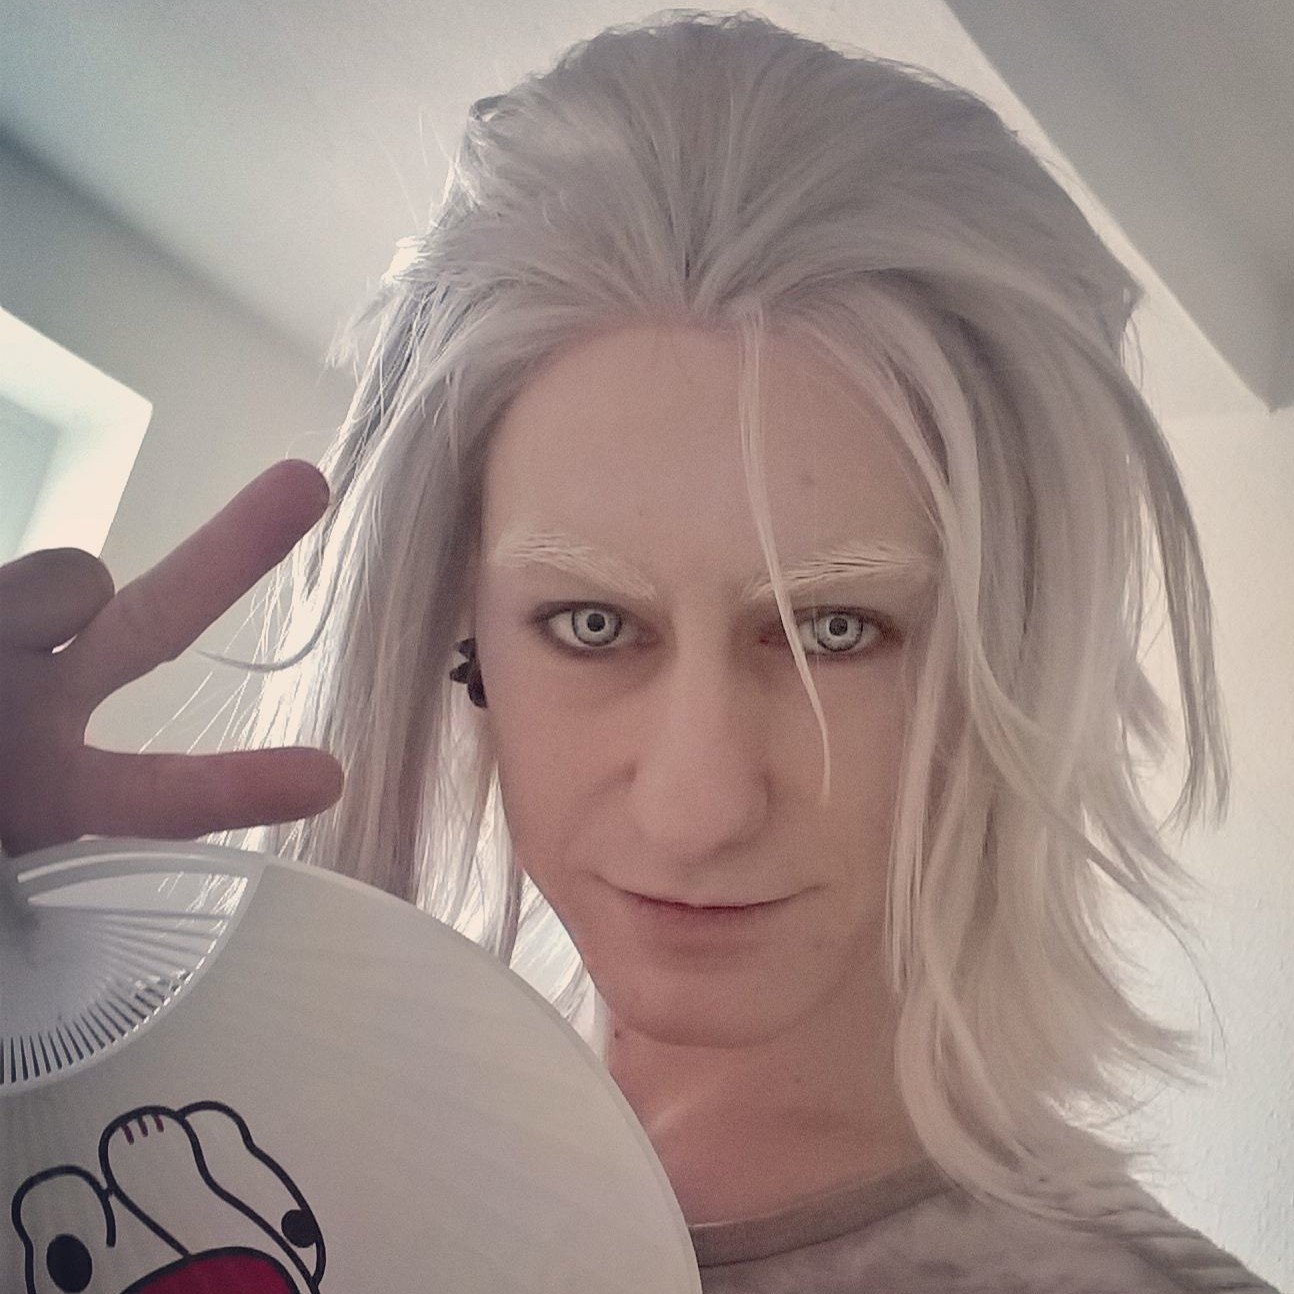 Cosplayer from Germany, sewing and crafting nerd :)